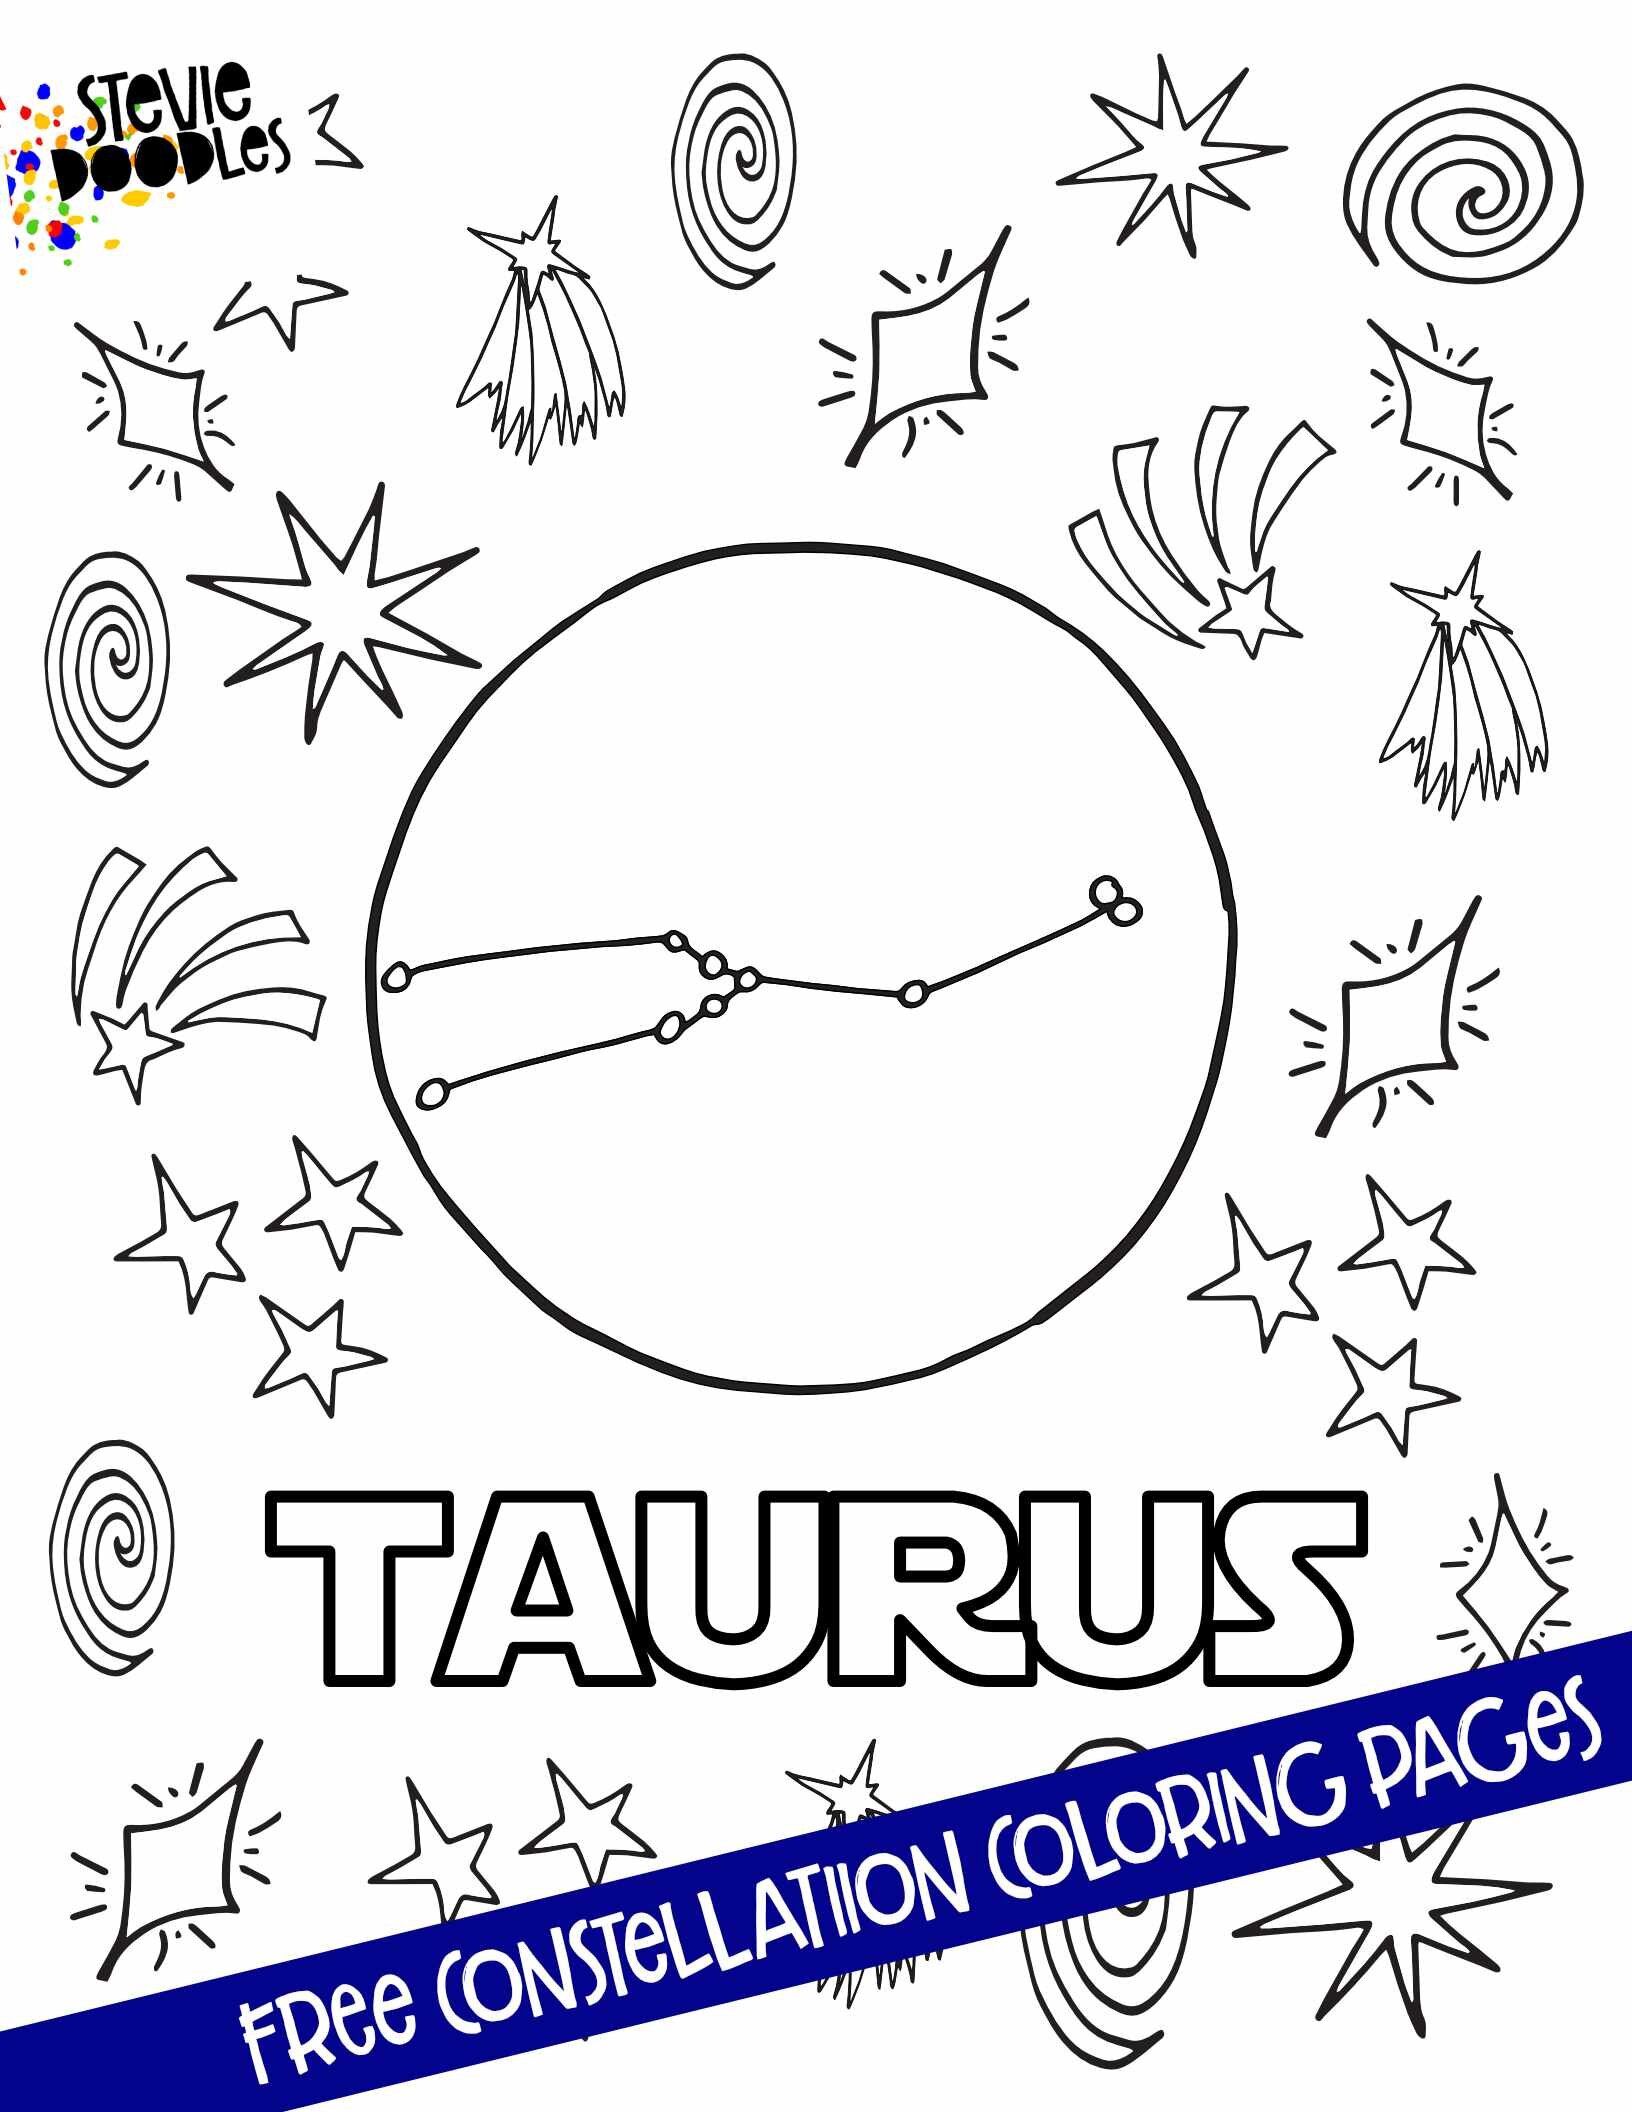 TAURUS - 12 Free Constellation Coloring Pages - Over 1000 Free Coloring Pages CLICK HERE TO PRINT THE PAGE ABOVE